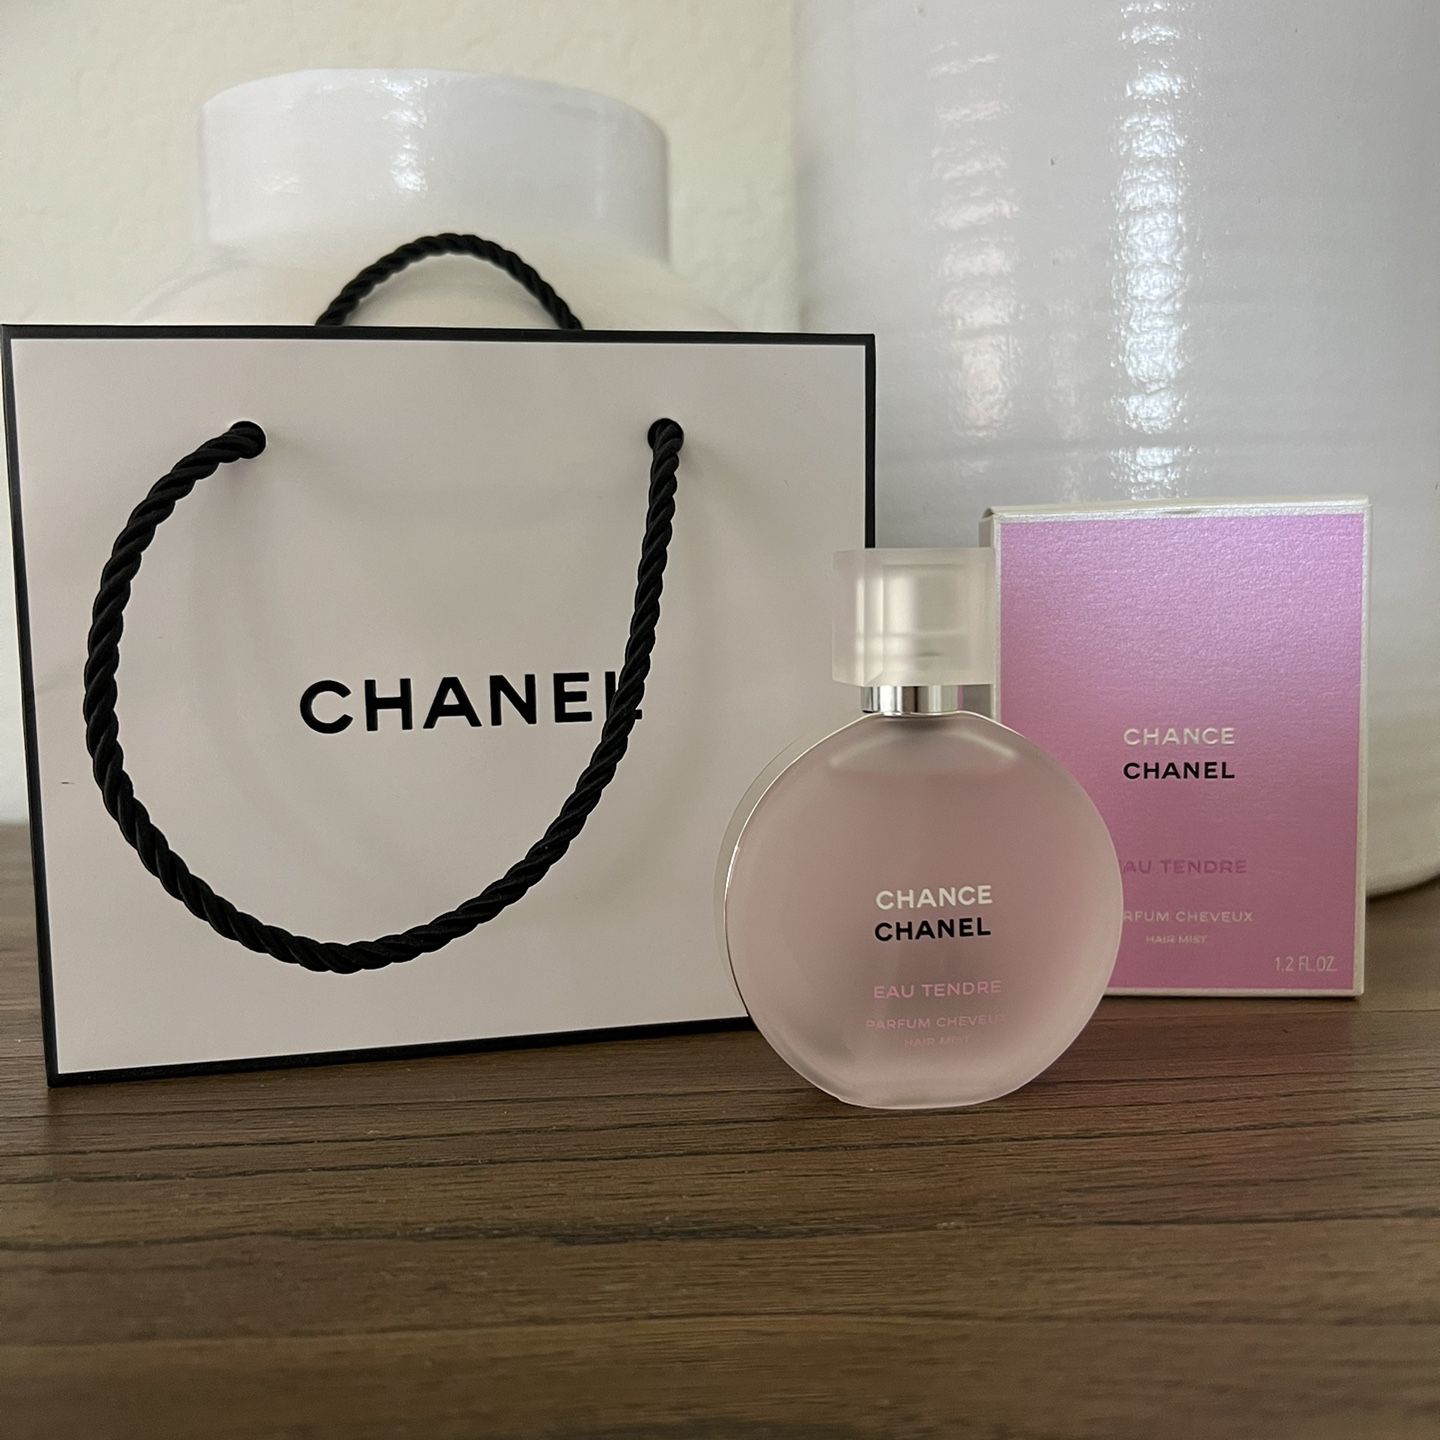 chanel products near me